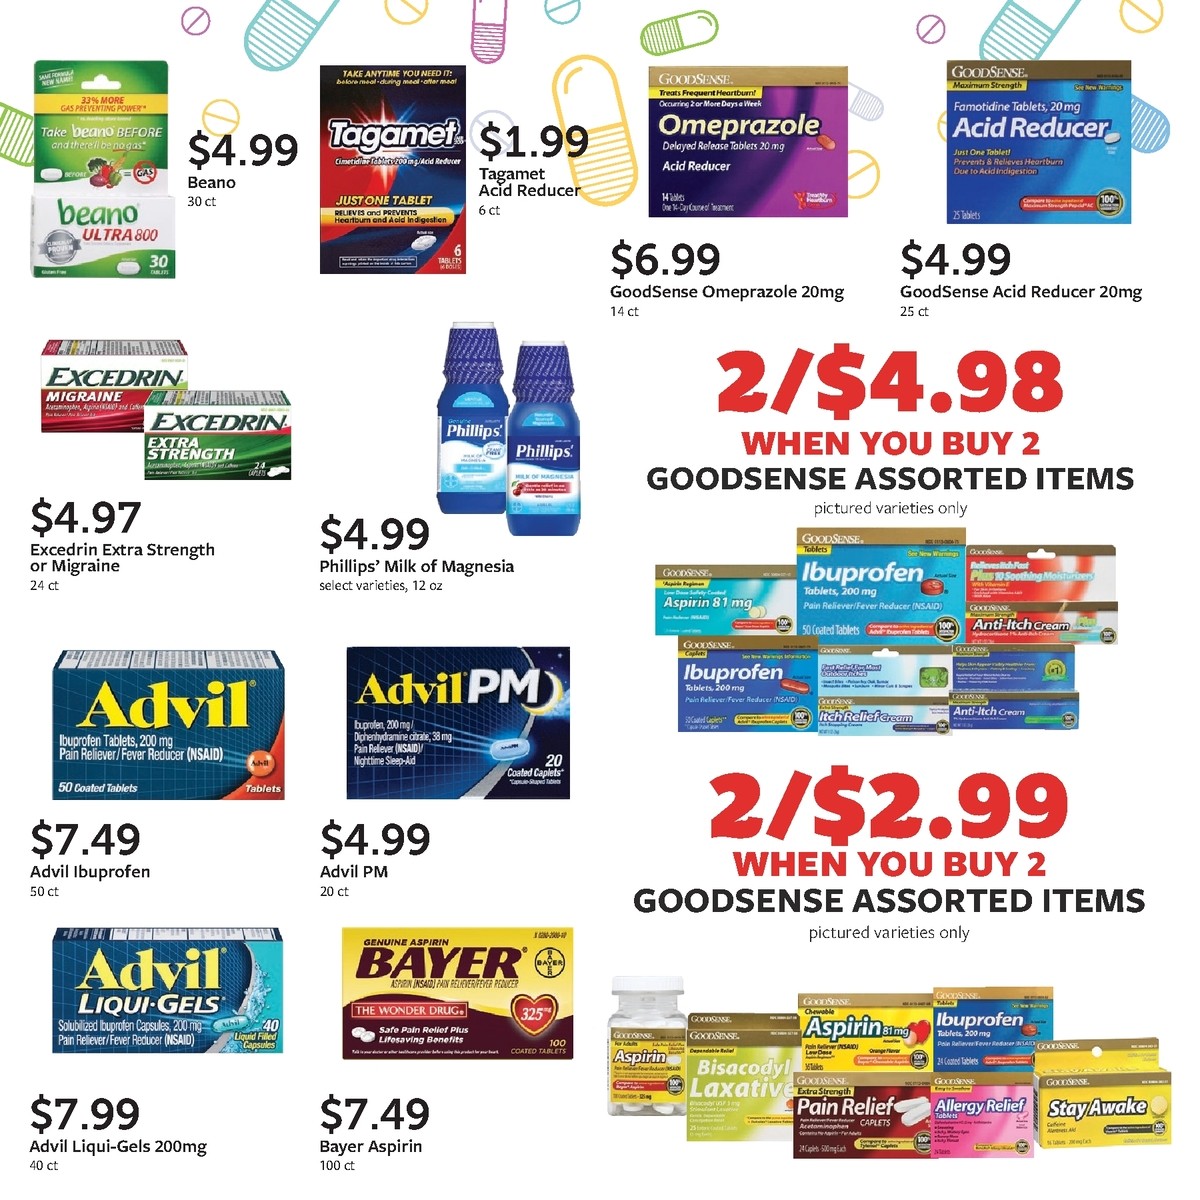 Fareway Weekly Ad from June 12